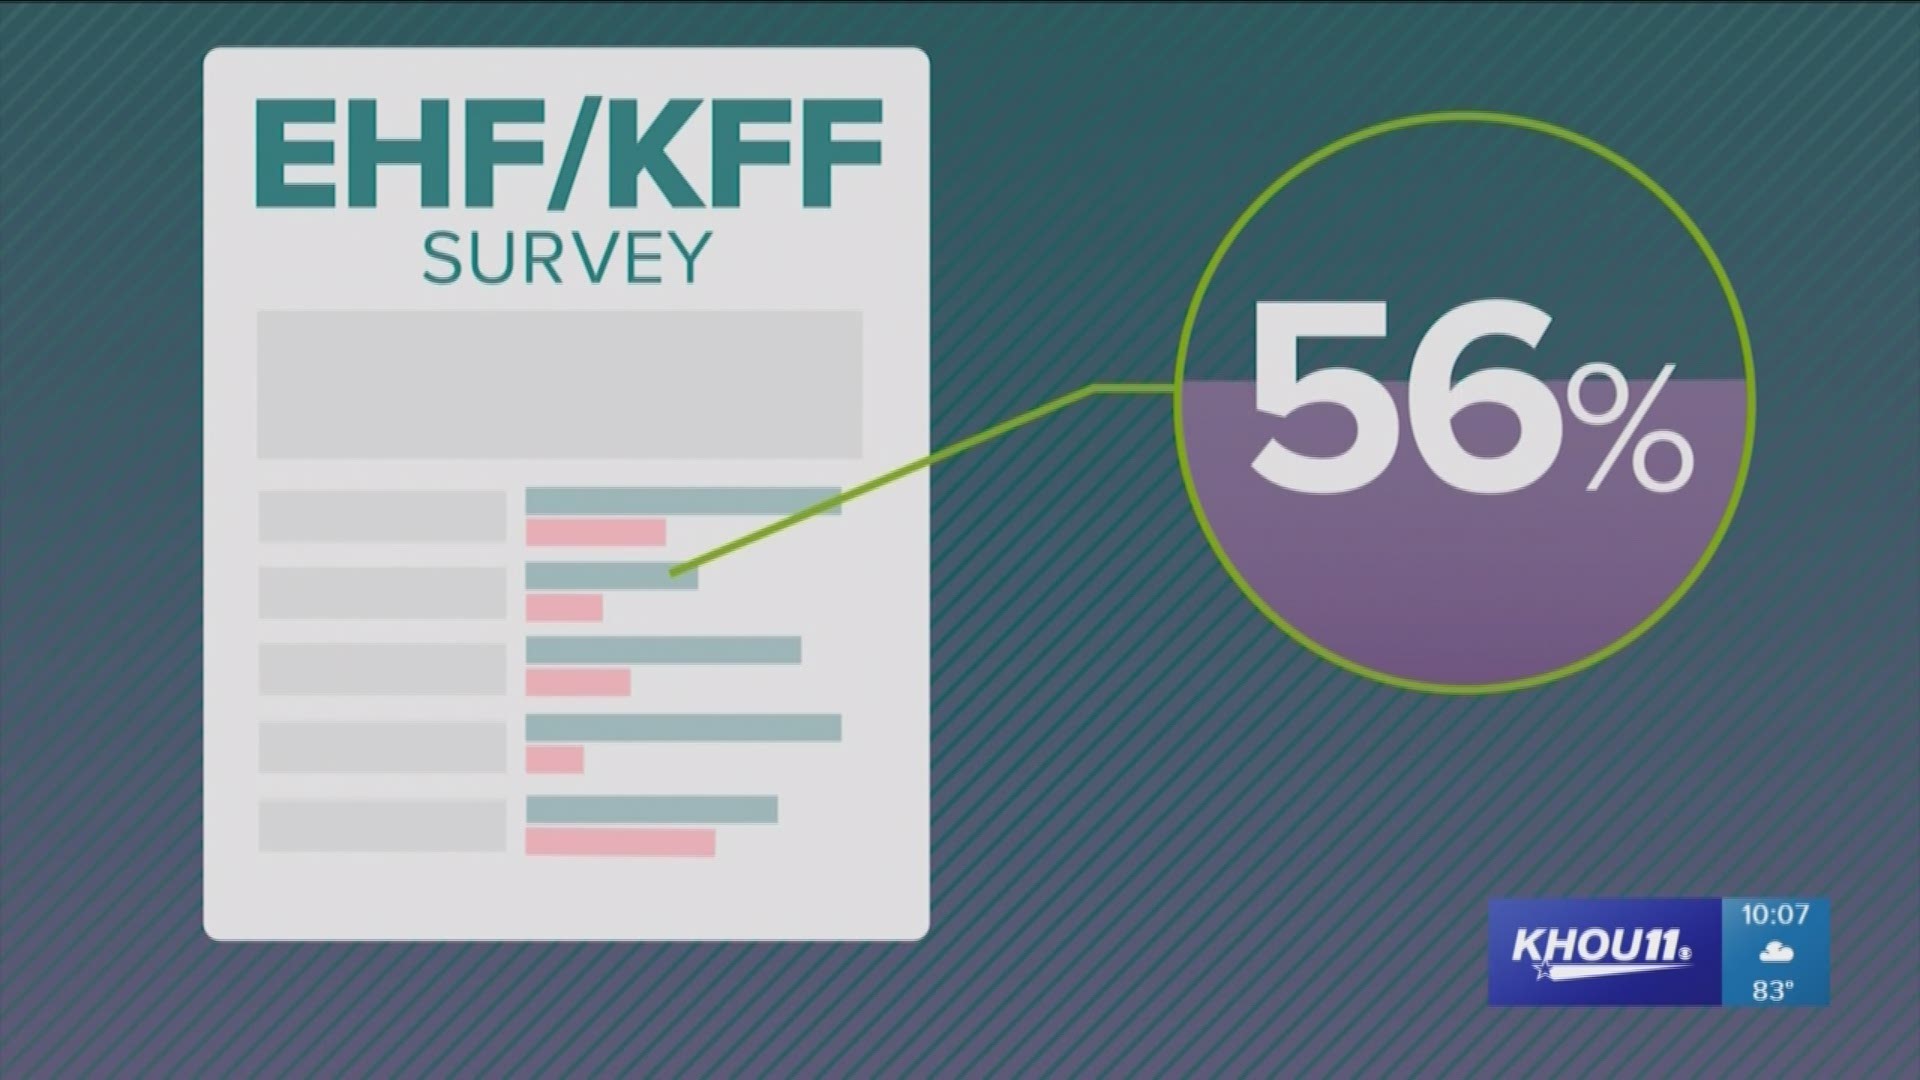 Three months after the storm, the EHF/KFF Survey found 56 percent of people impacted felt like was "almost back to normal." Eleven months since the storm, that number jumped up to 70 percent. Good news, sure, but don't let that fool you.